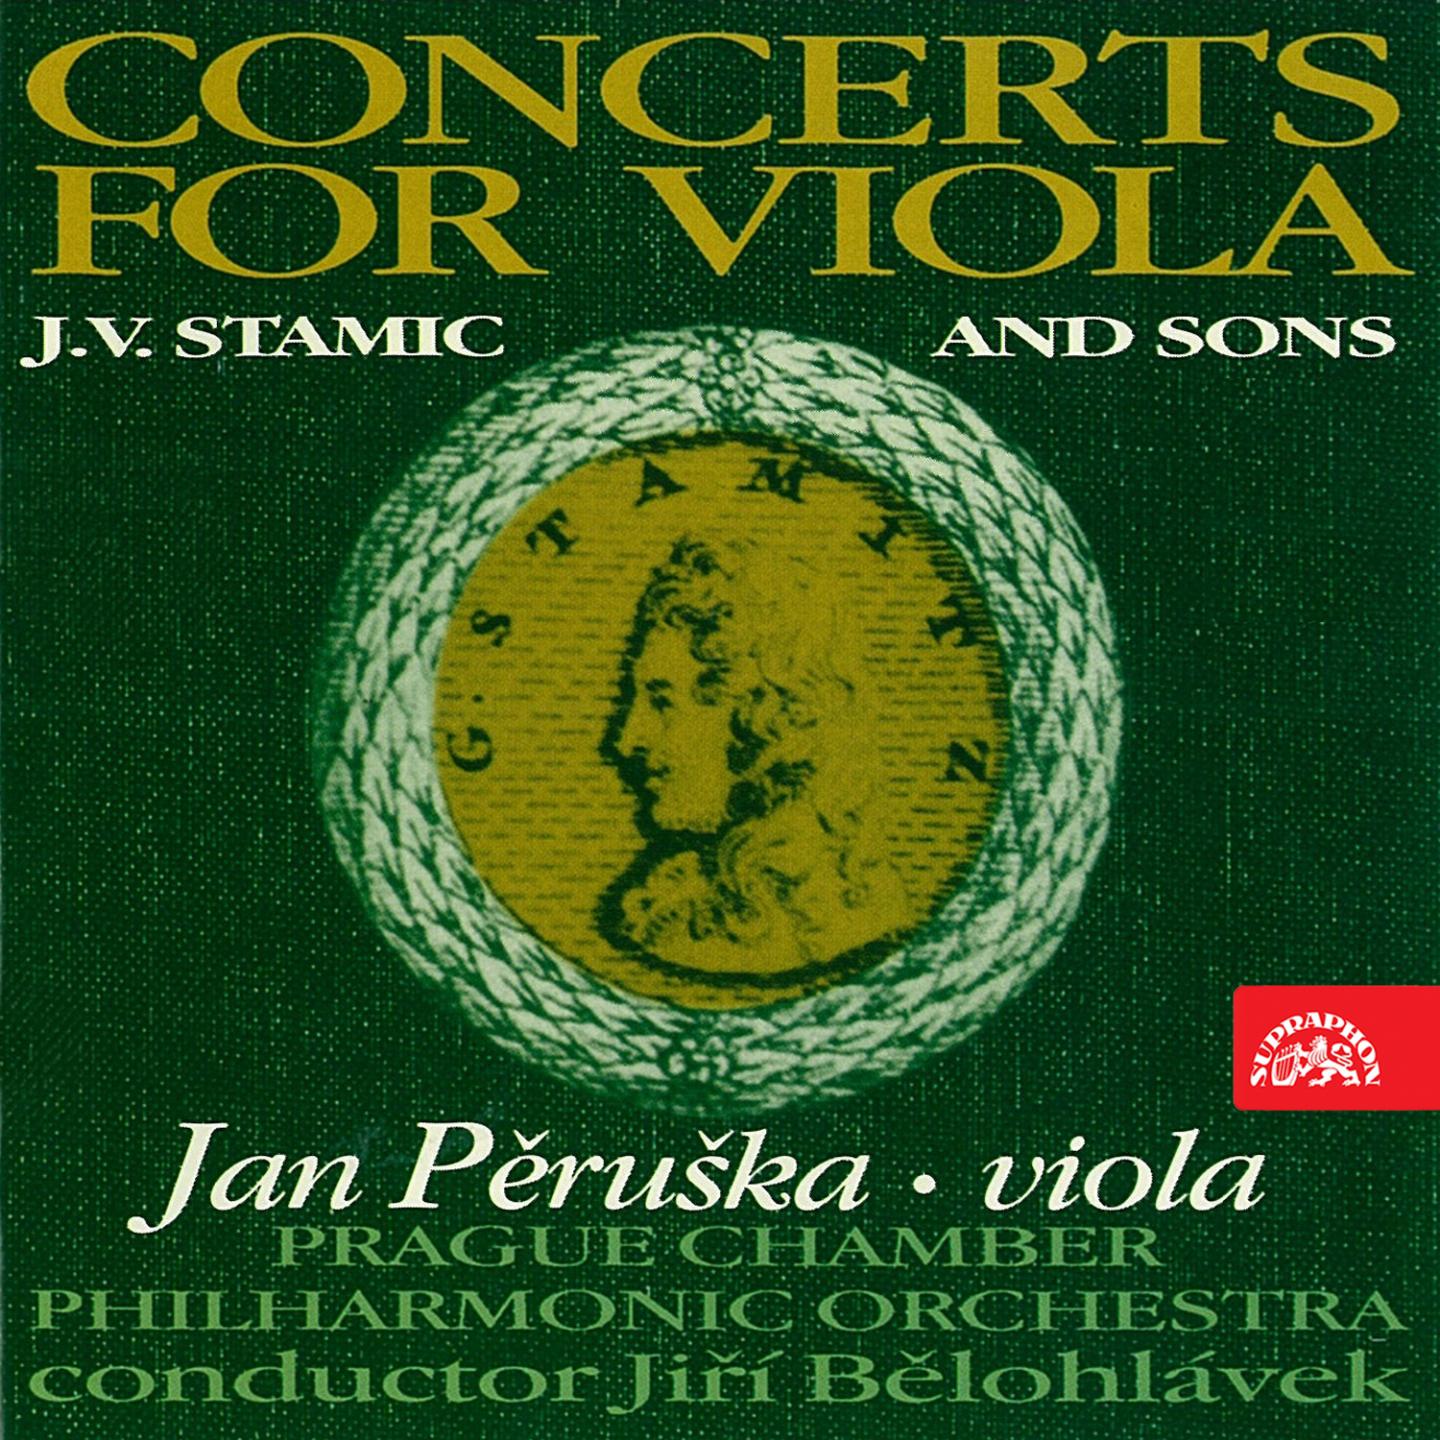 Concerto for Viola and Orchestra in B-Flat Major: I. Allegro